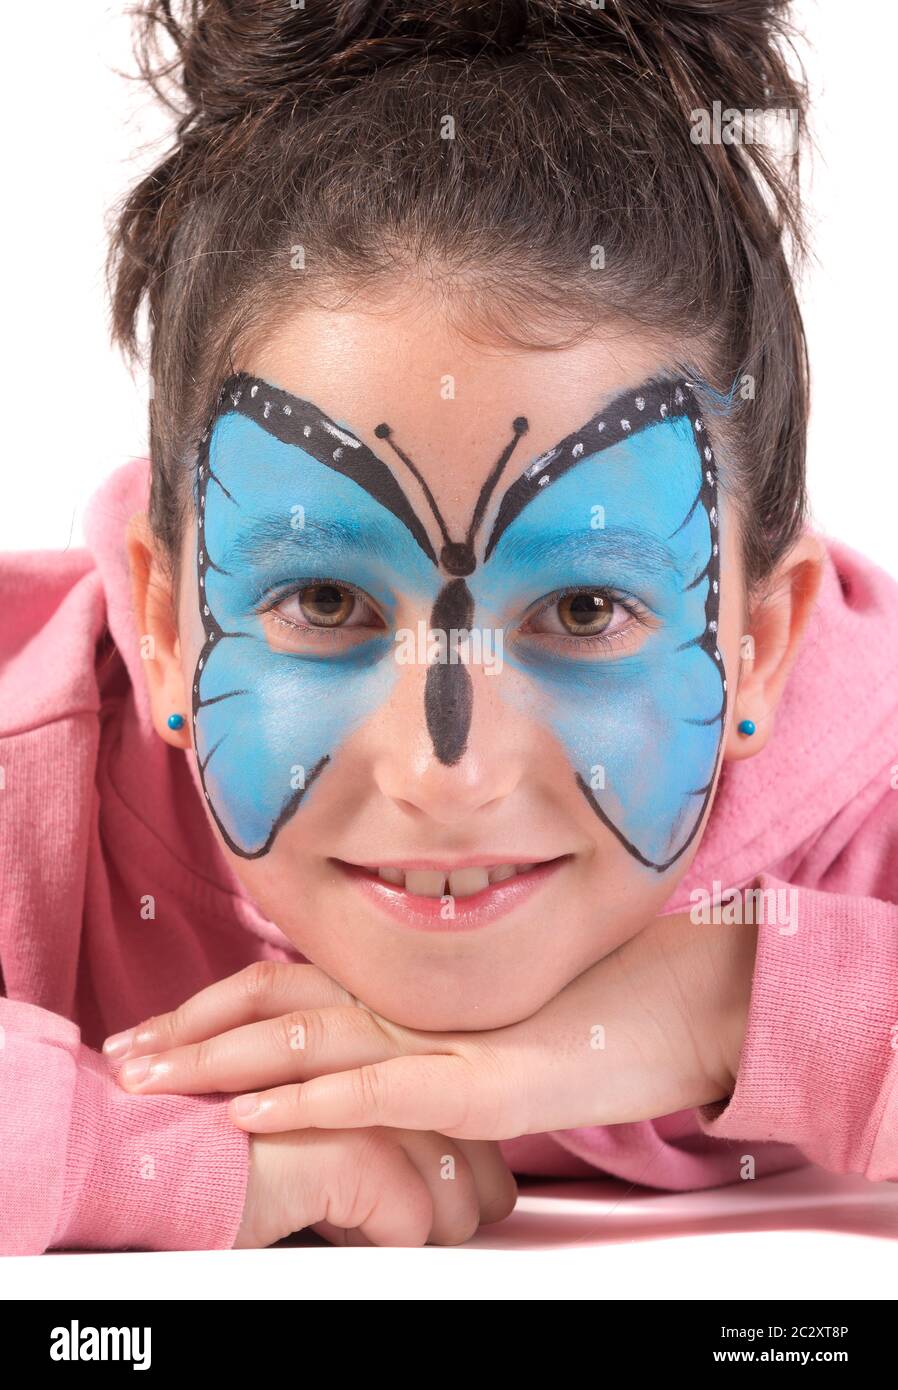 Girl with animal face-paint isolated in white Stock Photo - Alamy